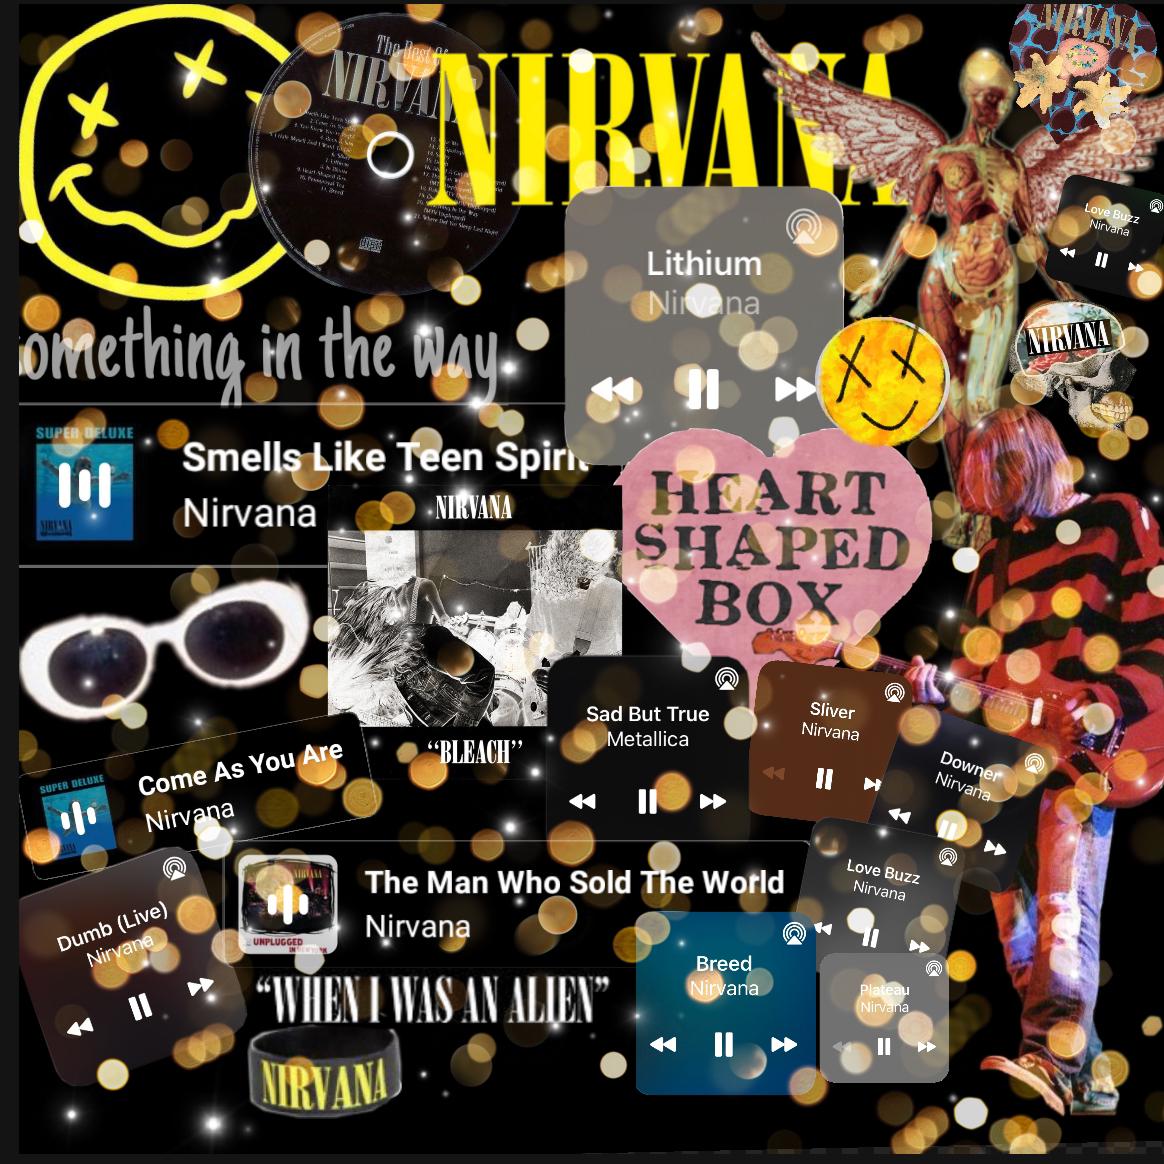 Nirvana 4life's images